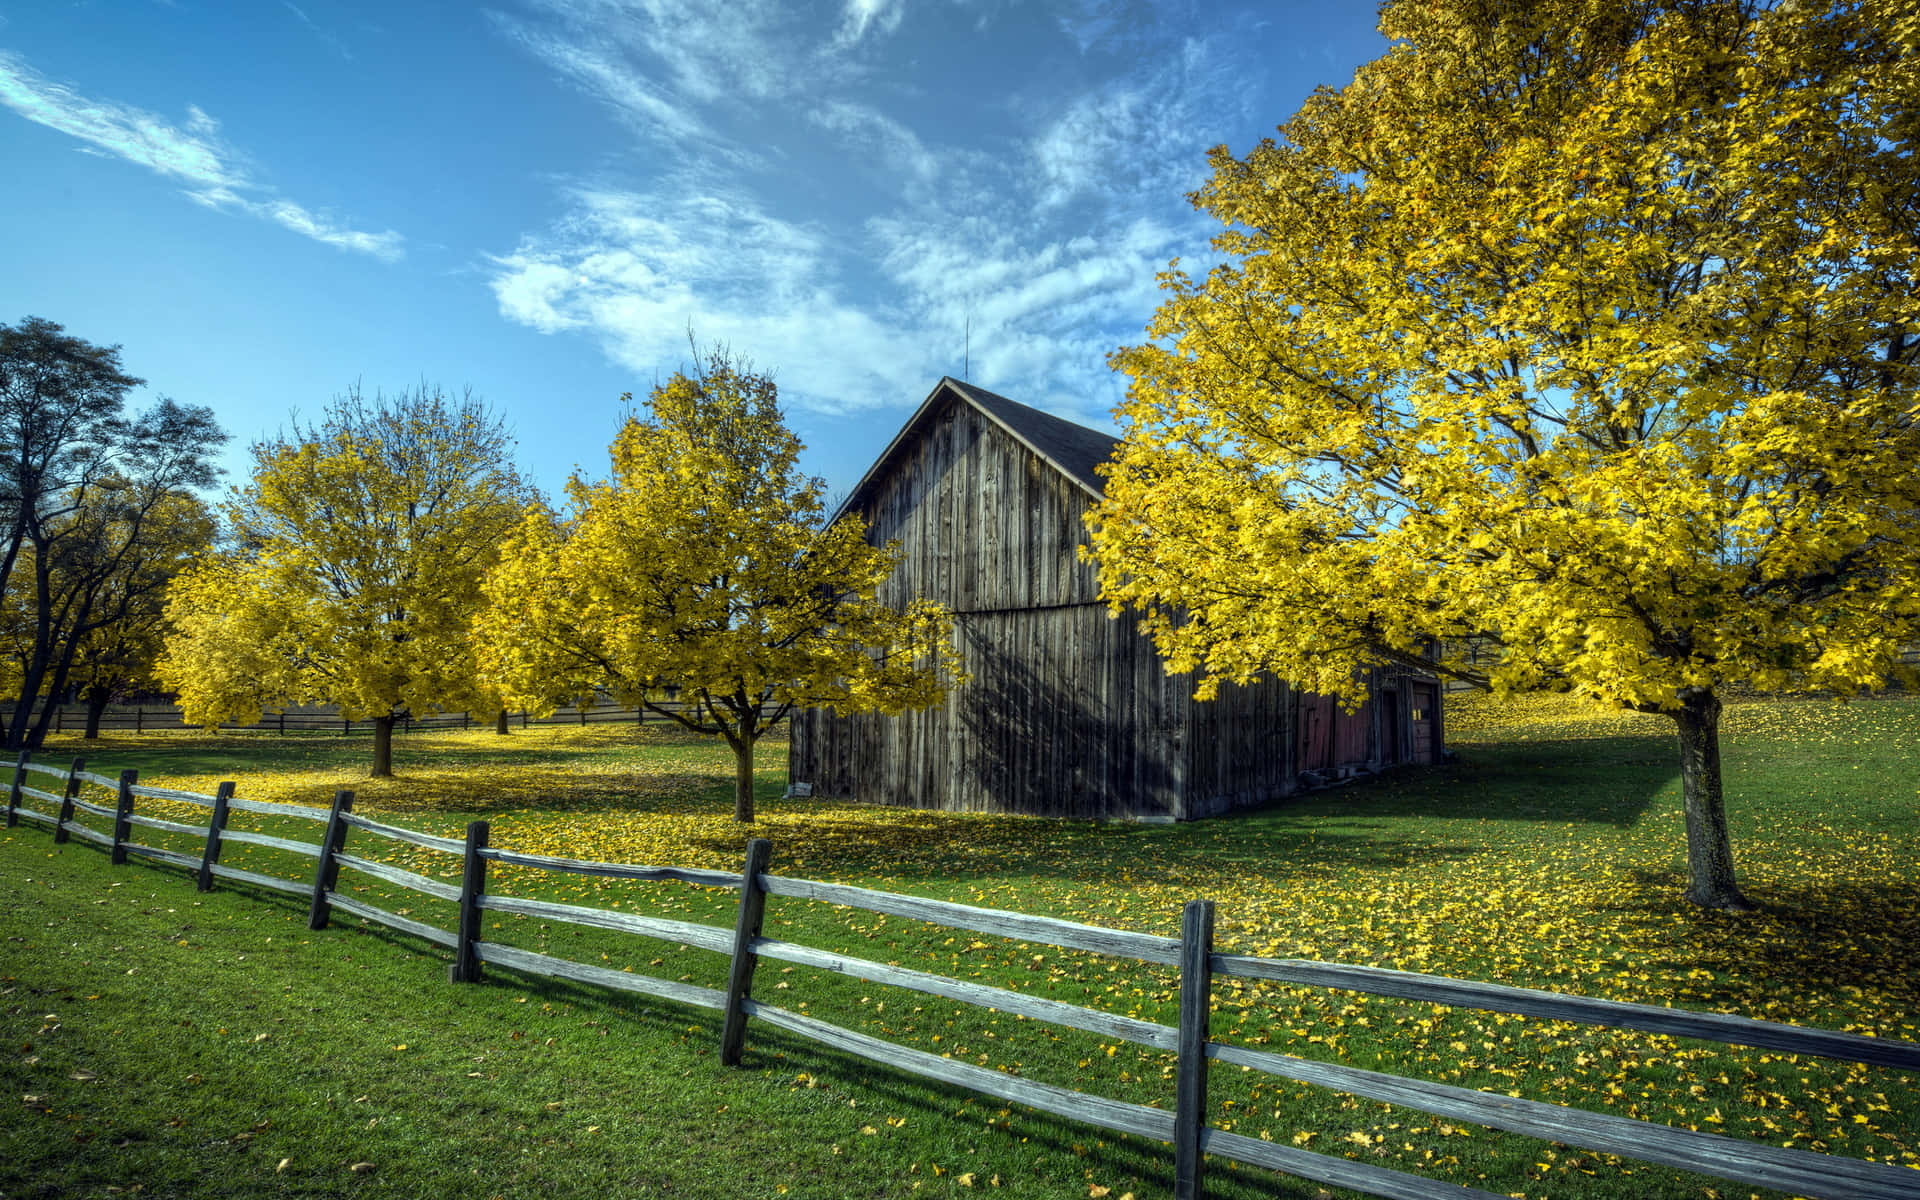 A picturesque barn nestled amidst the vibrant fall foliage Wallpaper